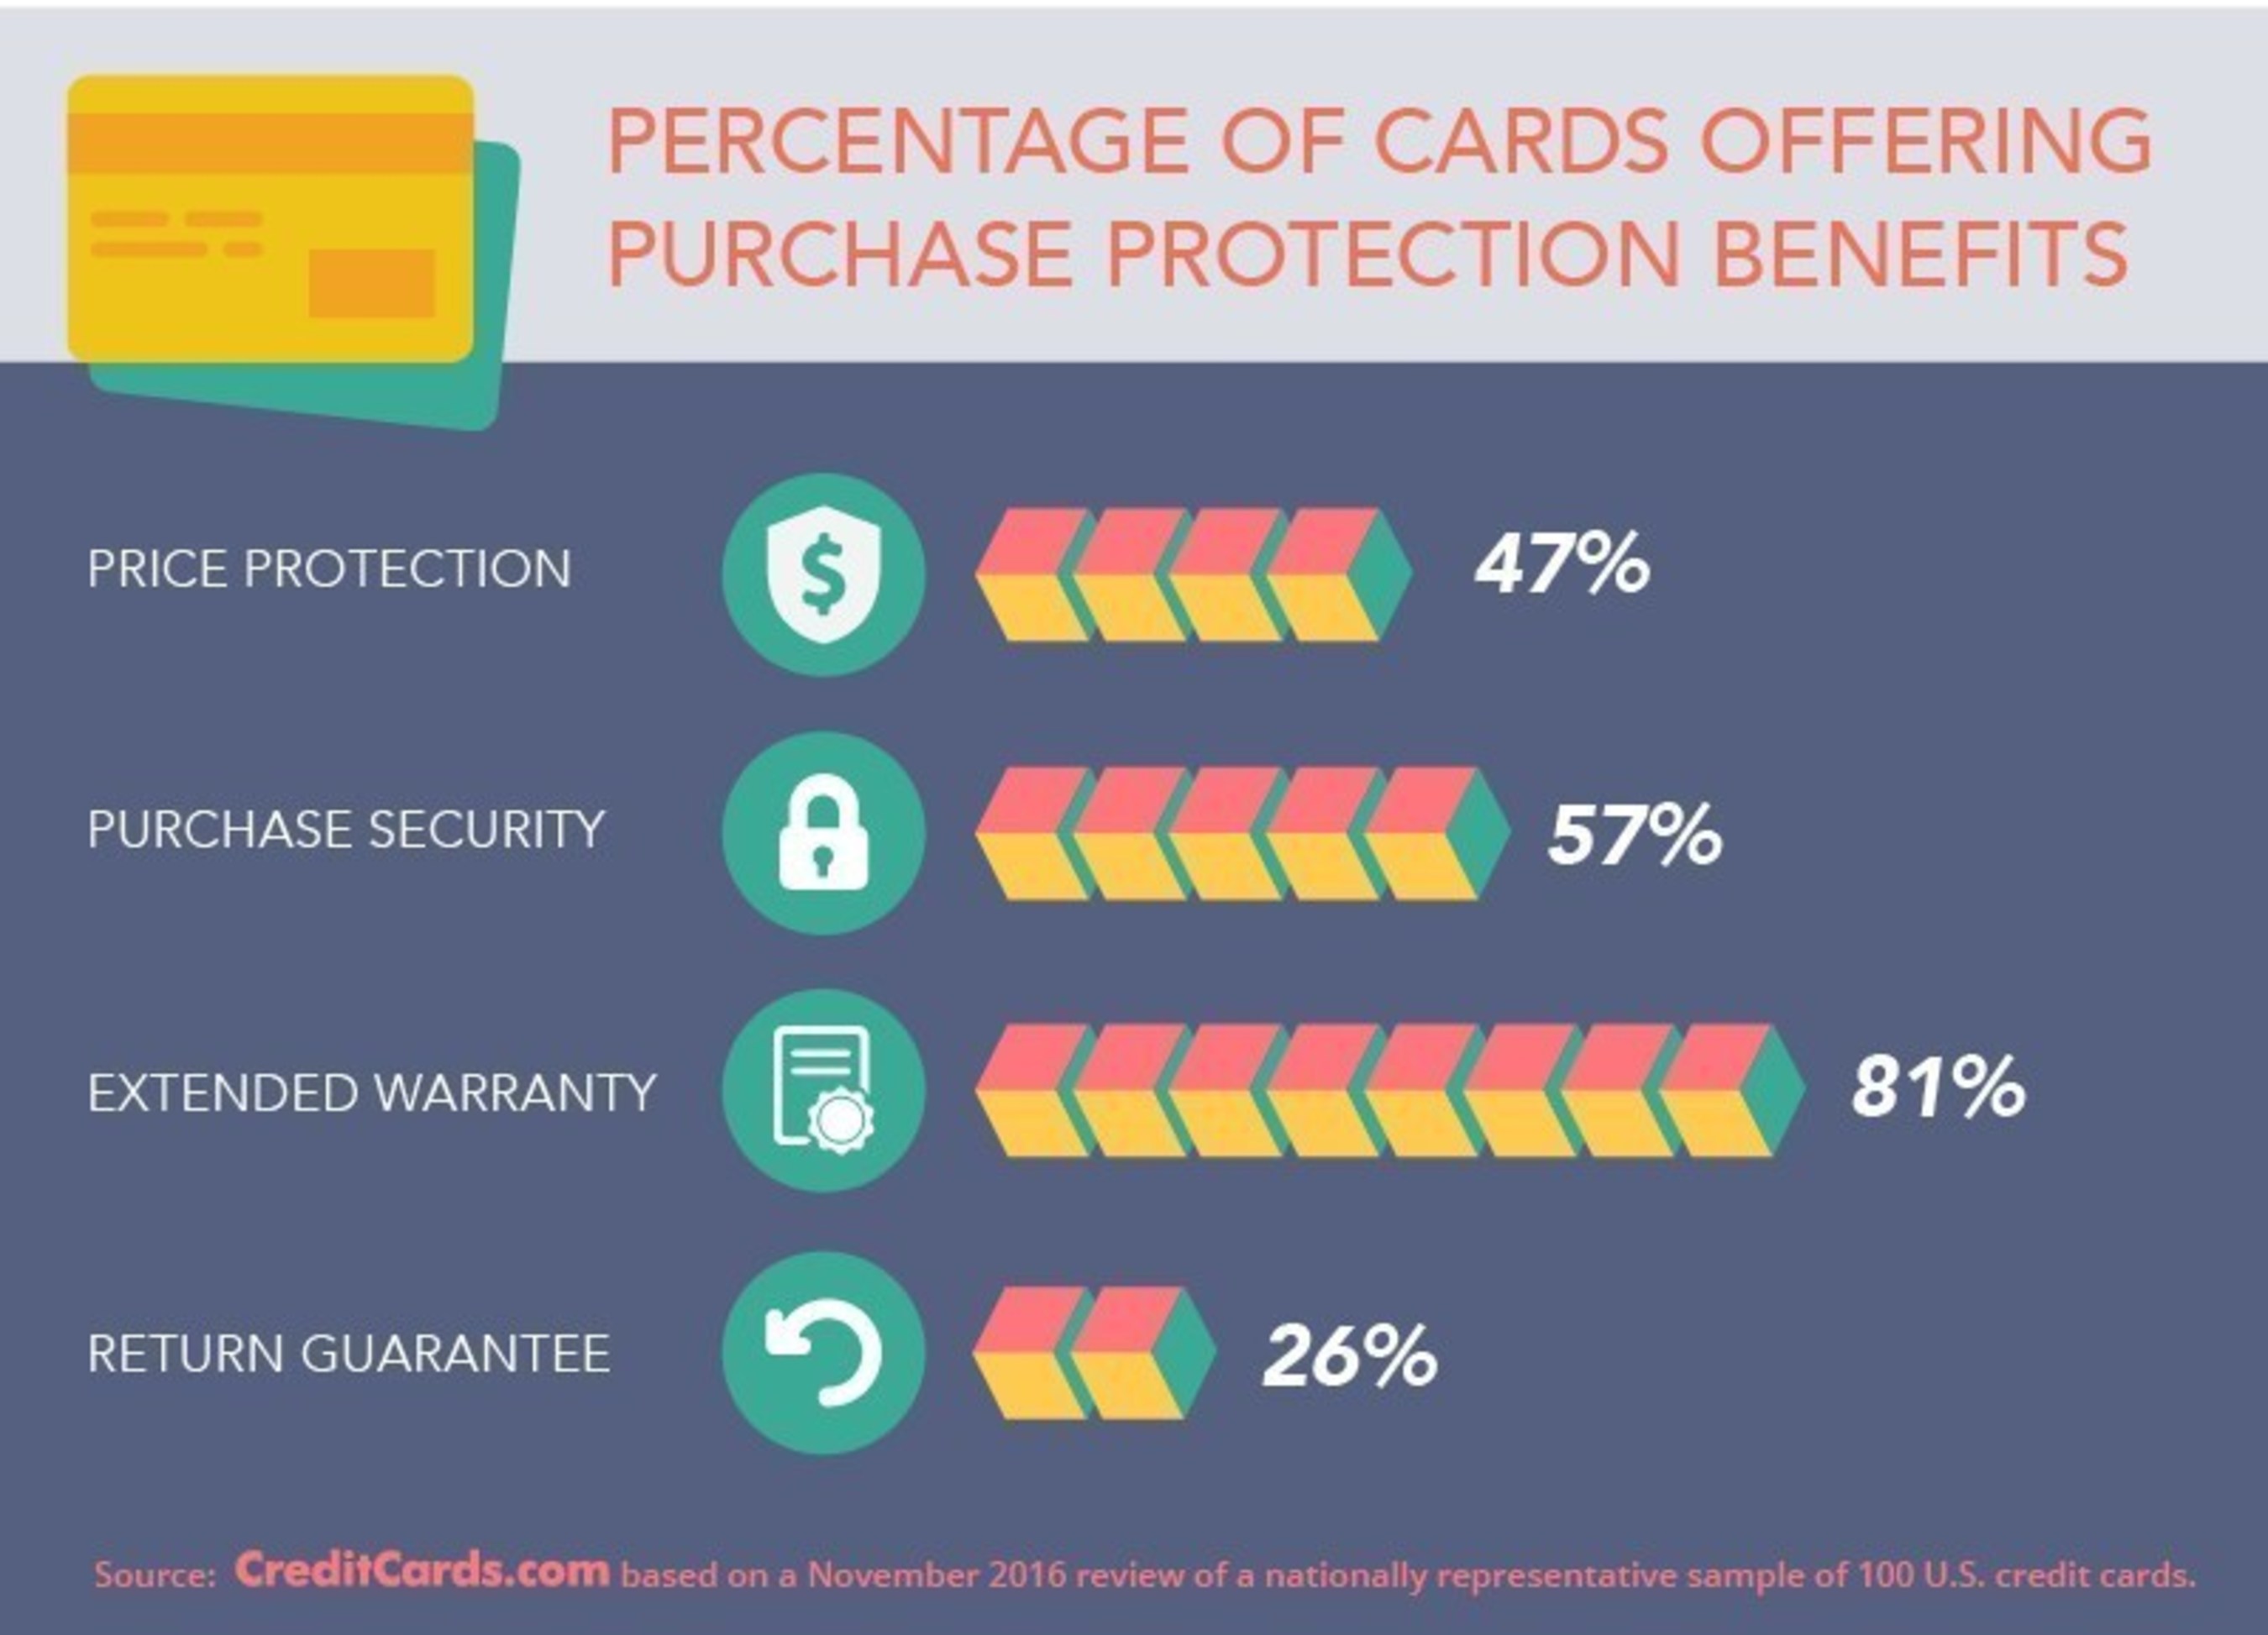 Holiday shoppers should take advantage of free credit card perks such as extended warranties, purchase security, price protection and guaranteed returns.